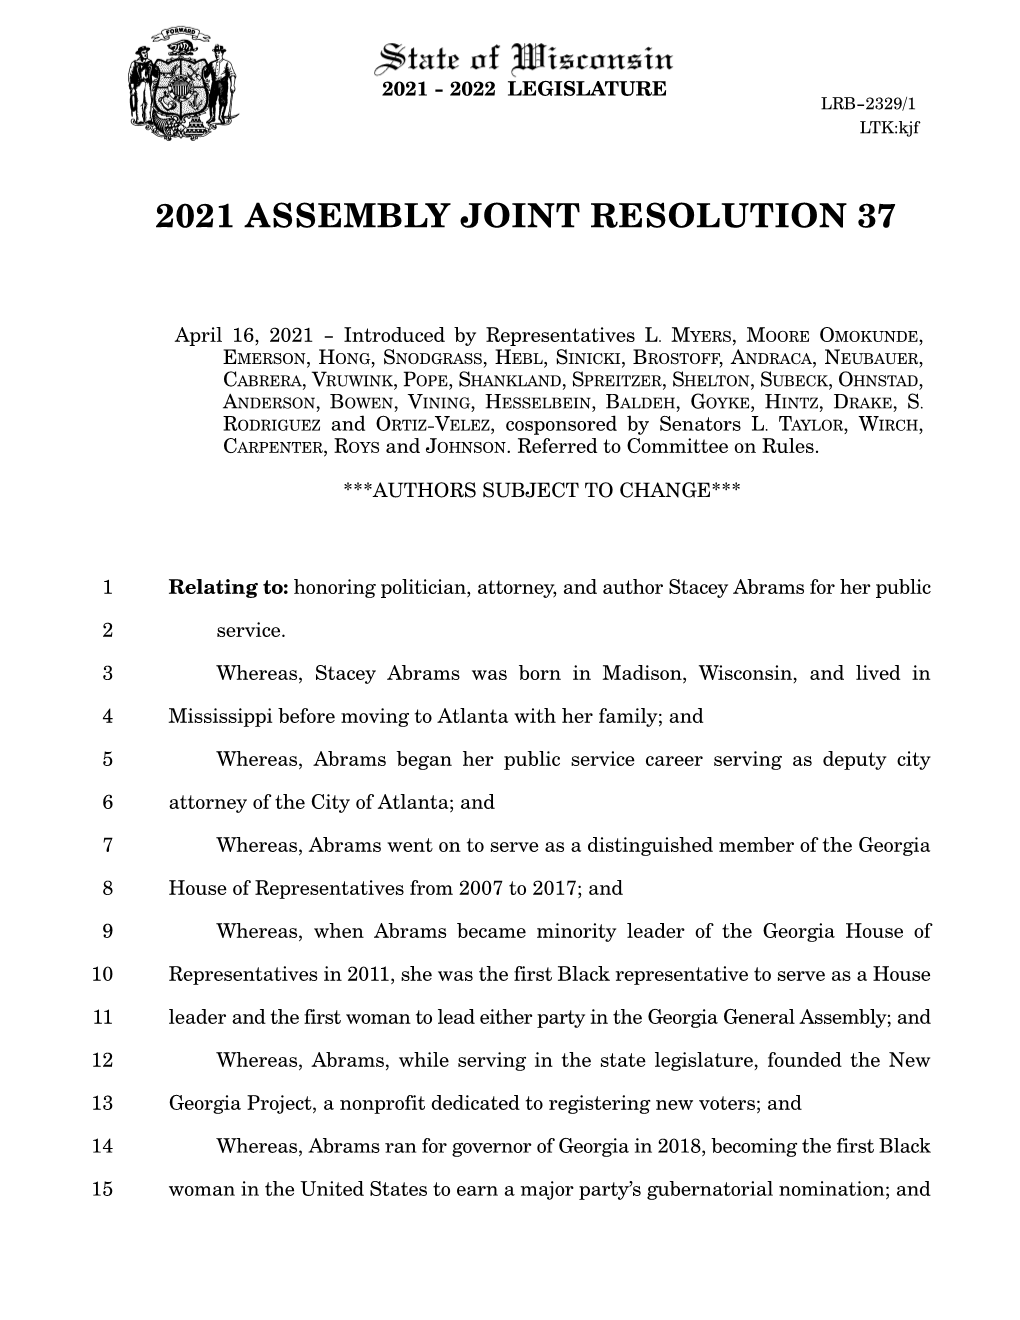 2021 Assembly Joint Resolution 37